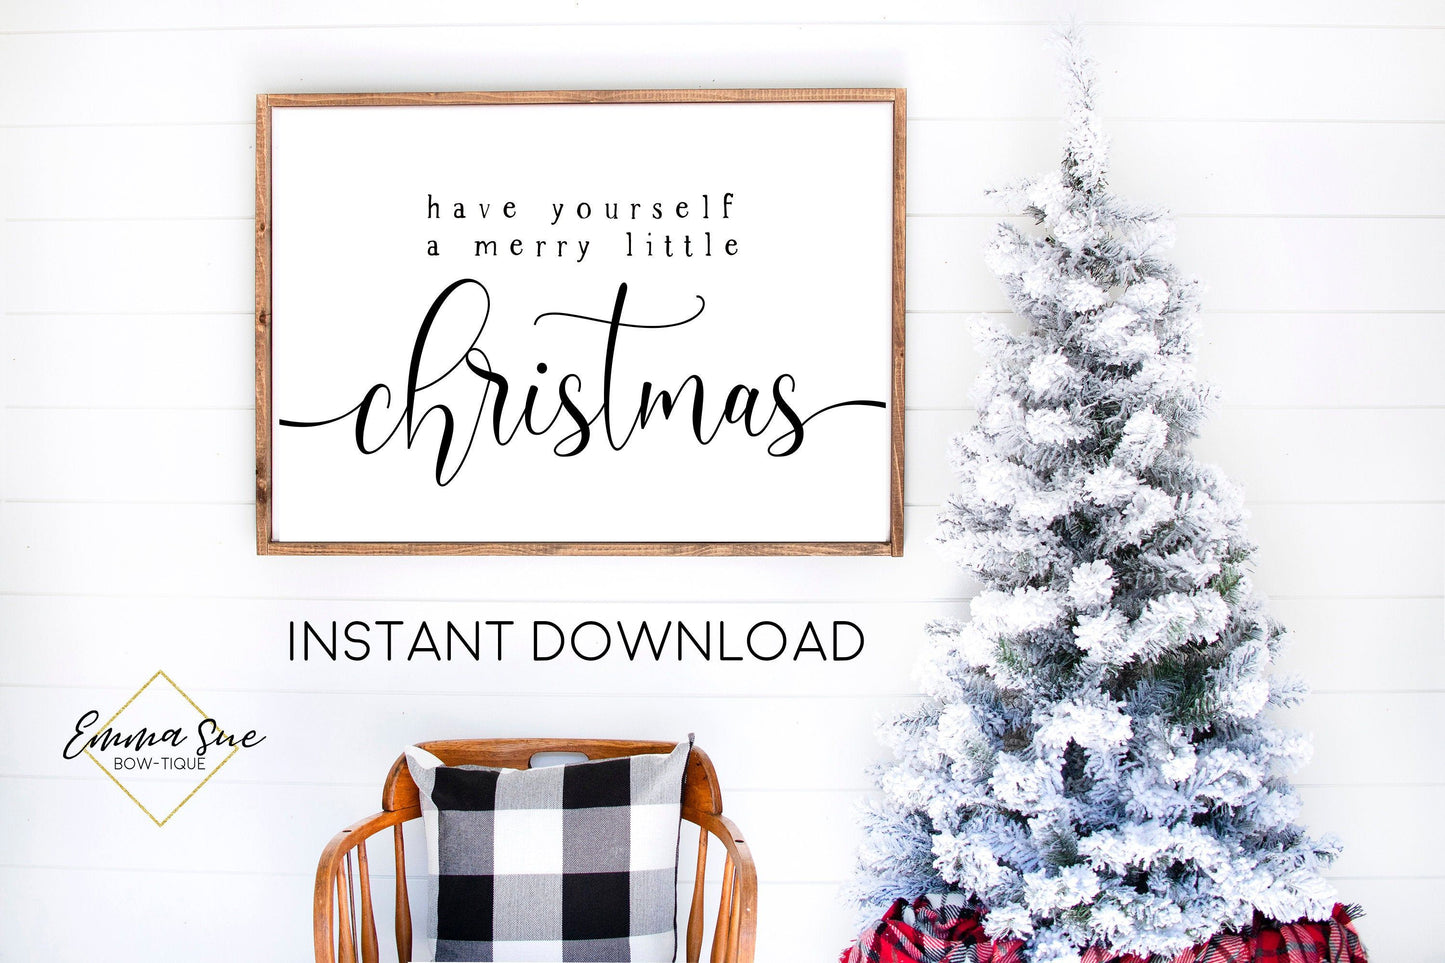 Have yourself a Merry Little Christmas - Black and White Christmas Decor Printable Sign Farmhouse Style  - Digital File